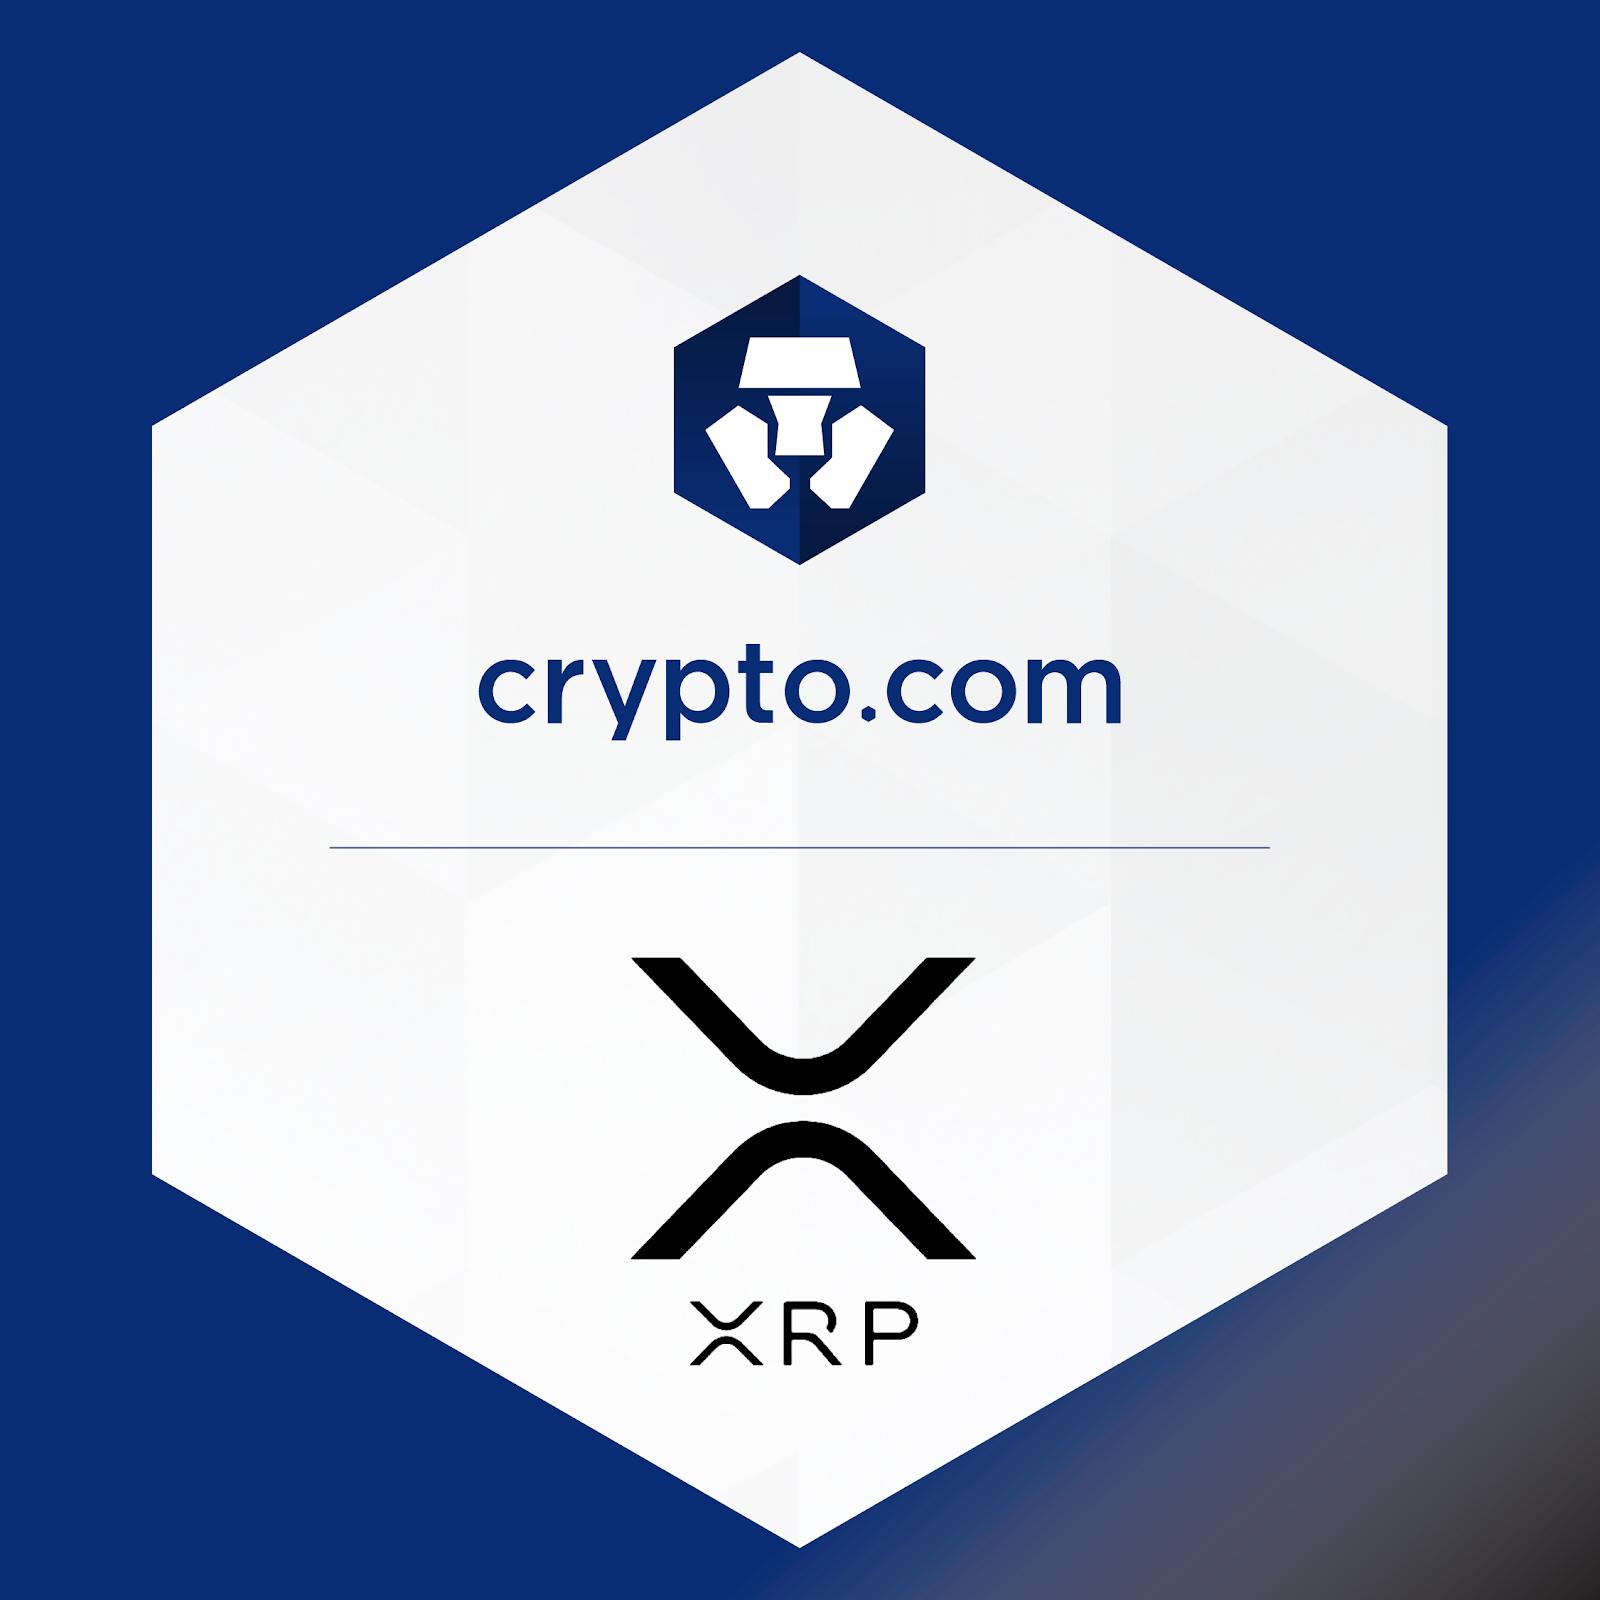 what app to buy xrp crypto